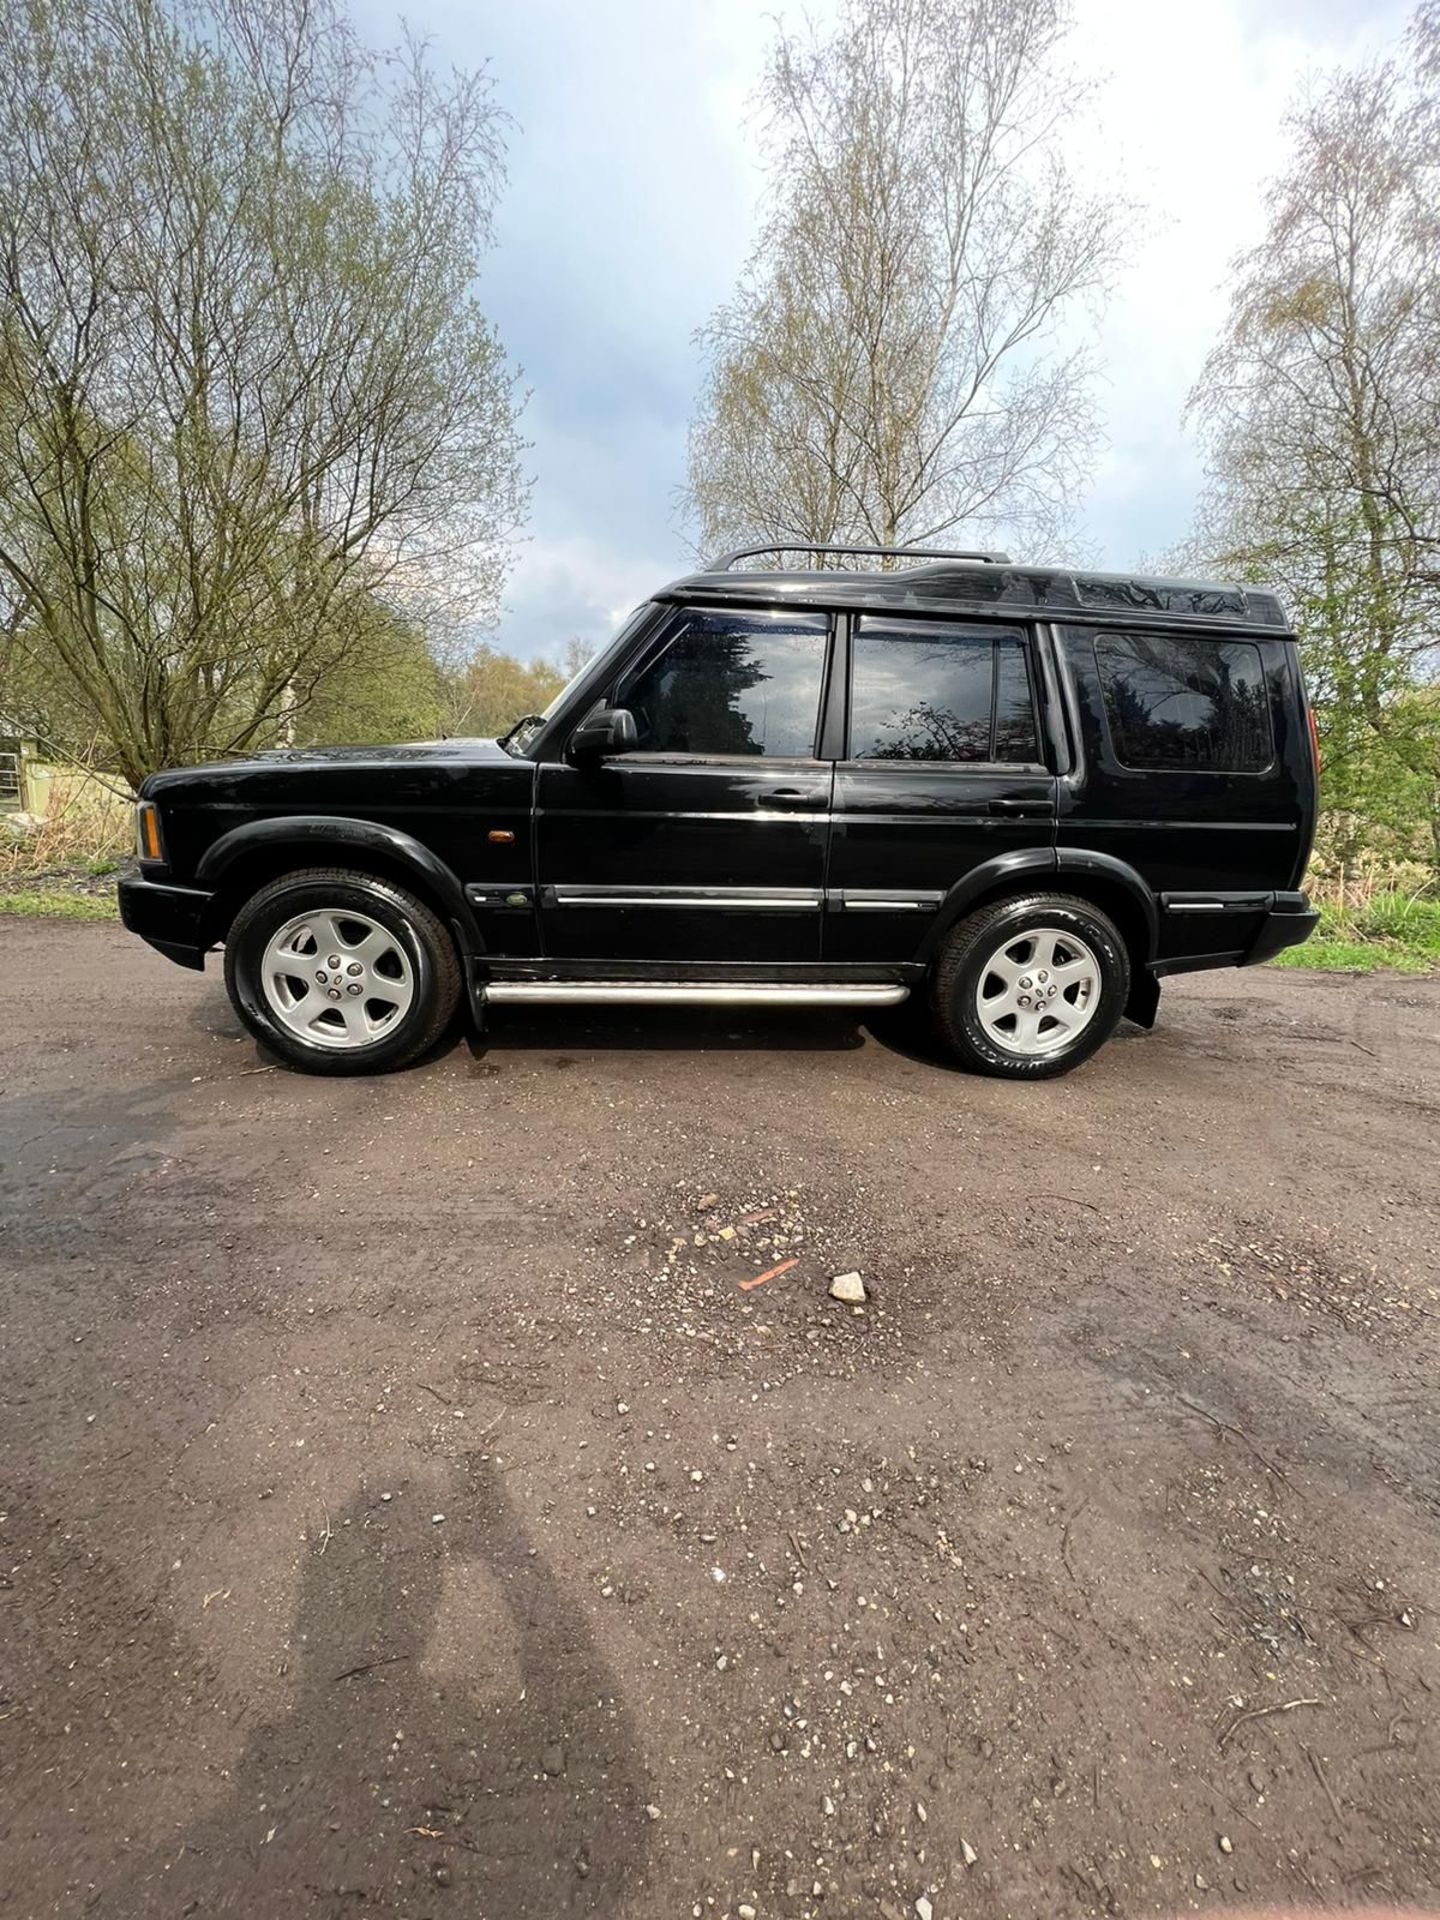 2002 52 PLATE LAND ROVER DISCOVERY 2 SUV ESTATE - TD5 - TOP OF THE RANGE - HALF LEATHER SEATS - Image 5 of 15